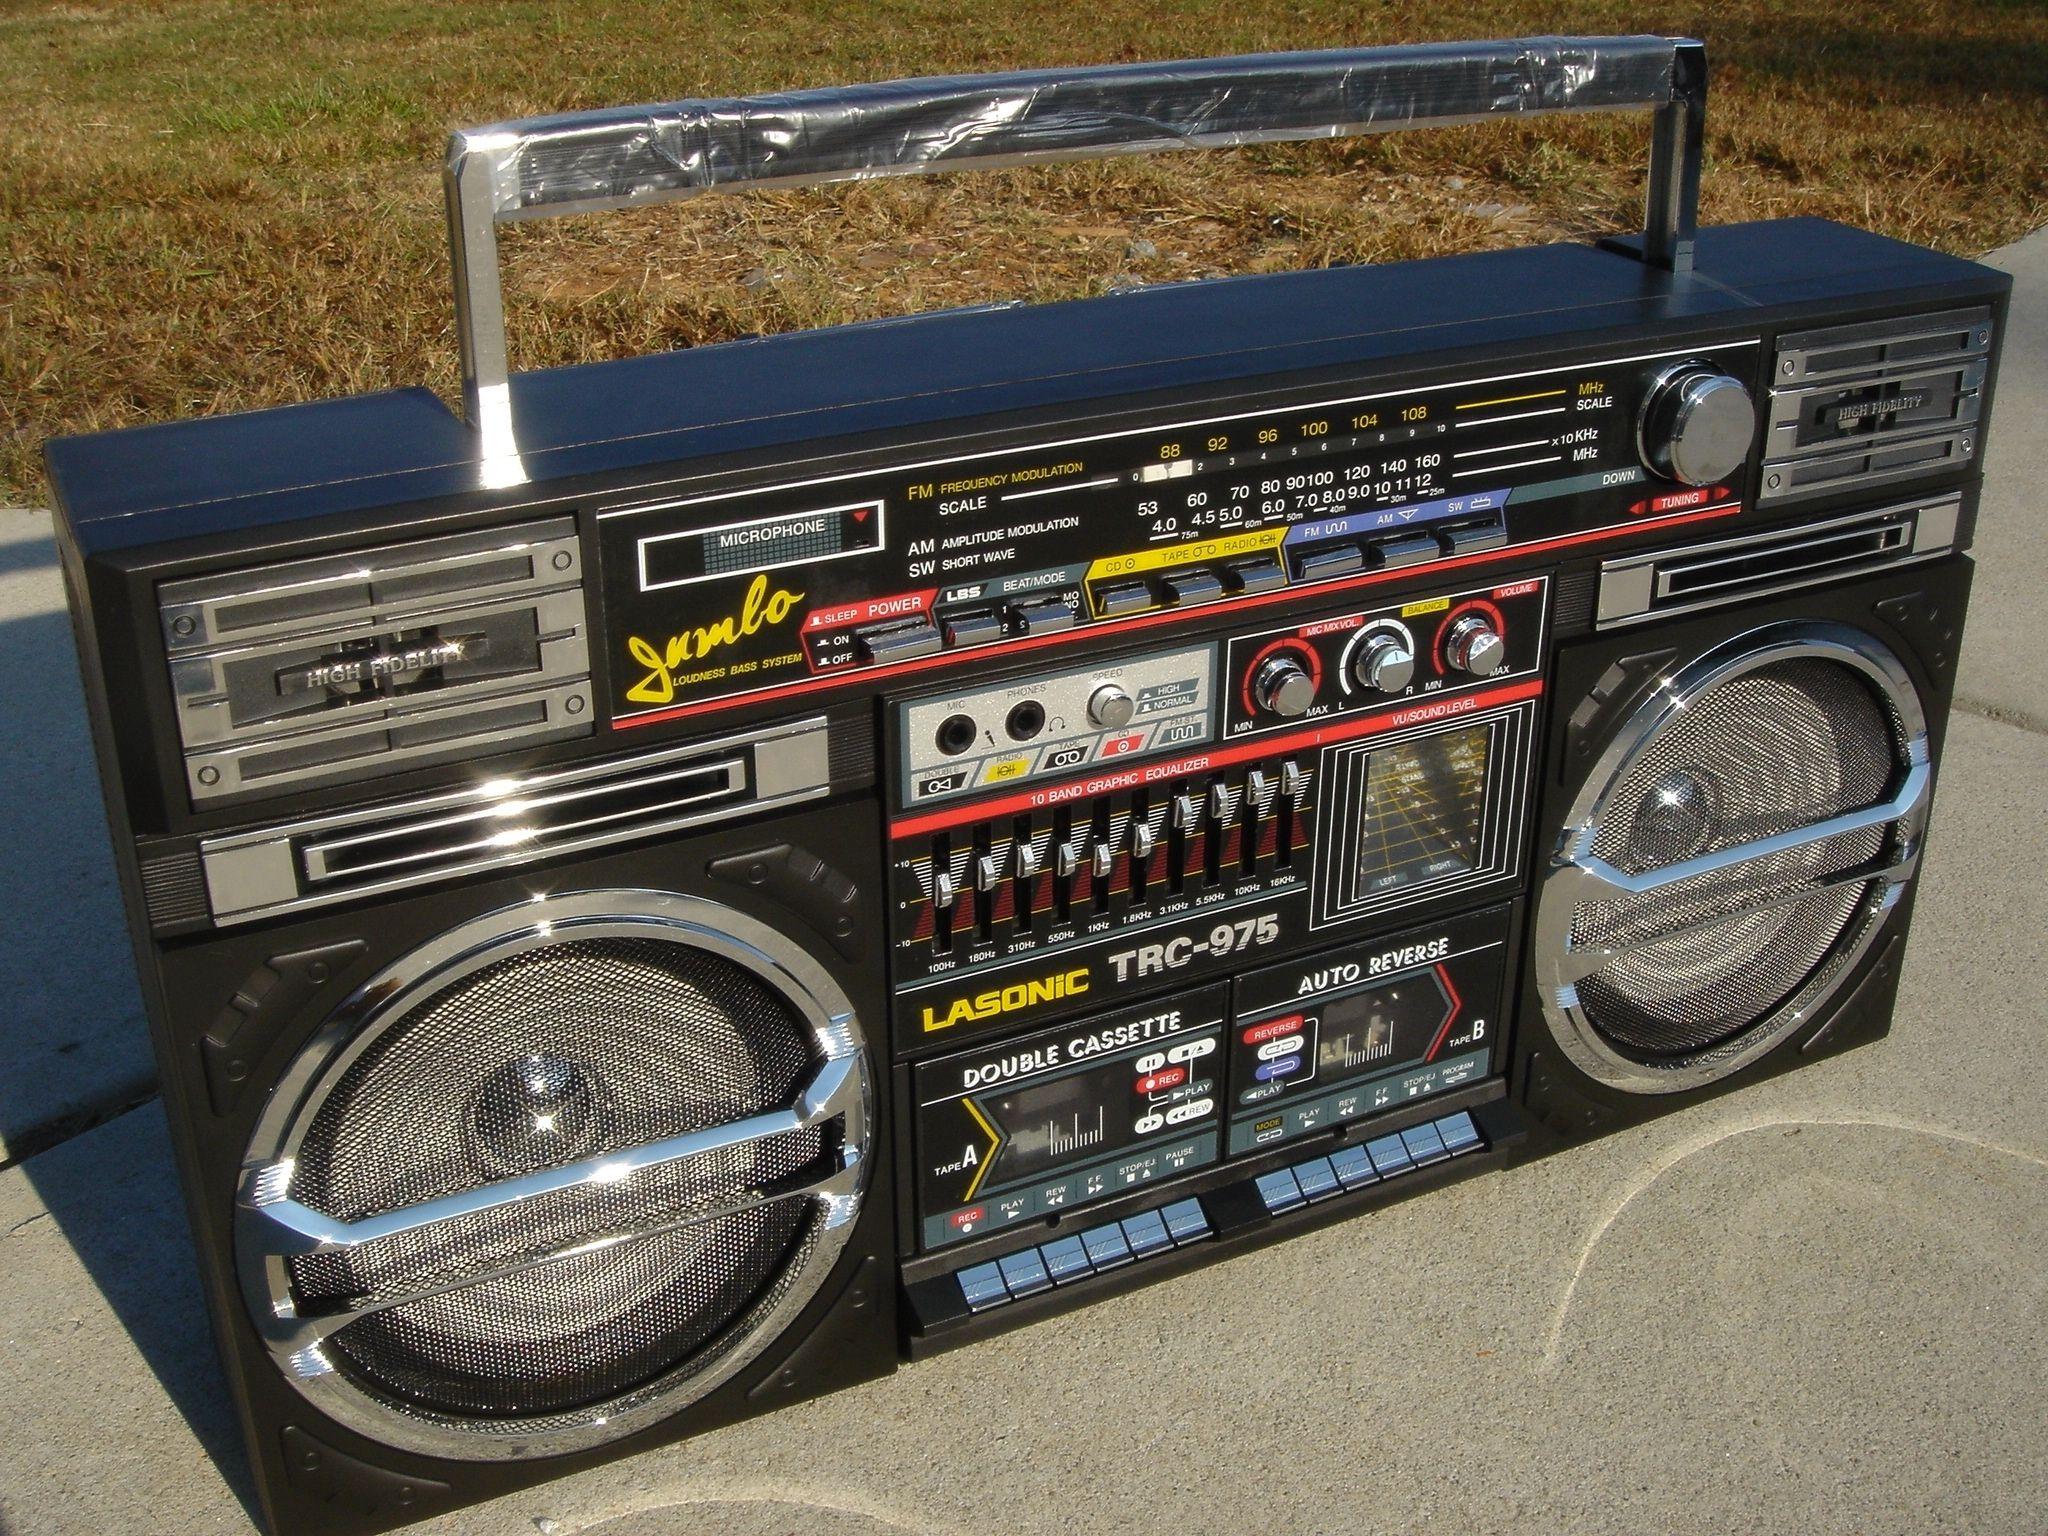 80s Boombox Wallpapers Top Free 80s Boombox Backgrounds Wallpaperaccess ...